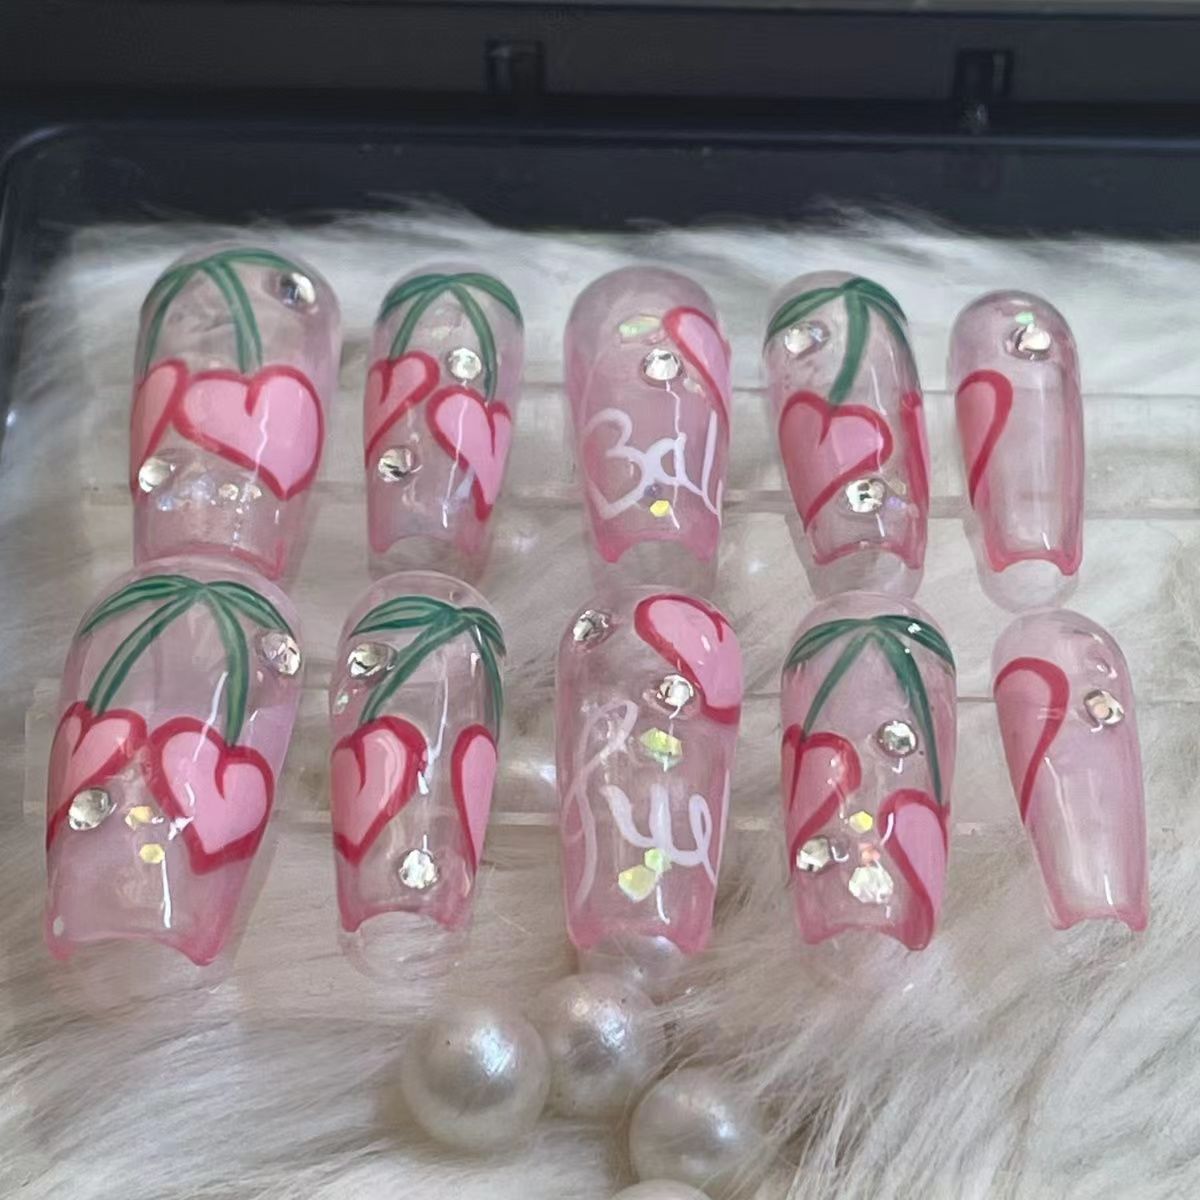 Water peach peach heart hand-painted girl heart handmade wear nail spicy girl sweet cool nail show white nail patch removable